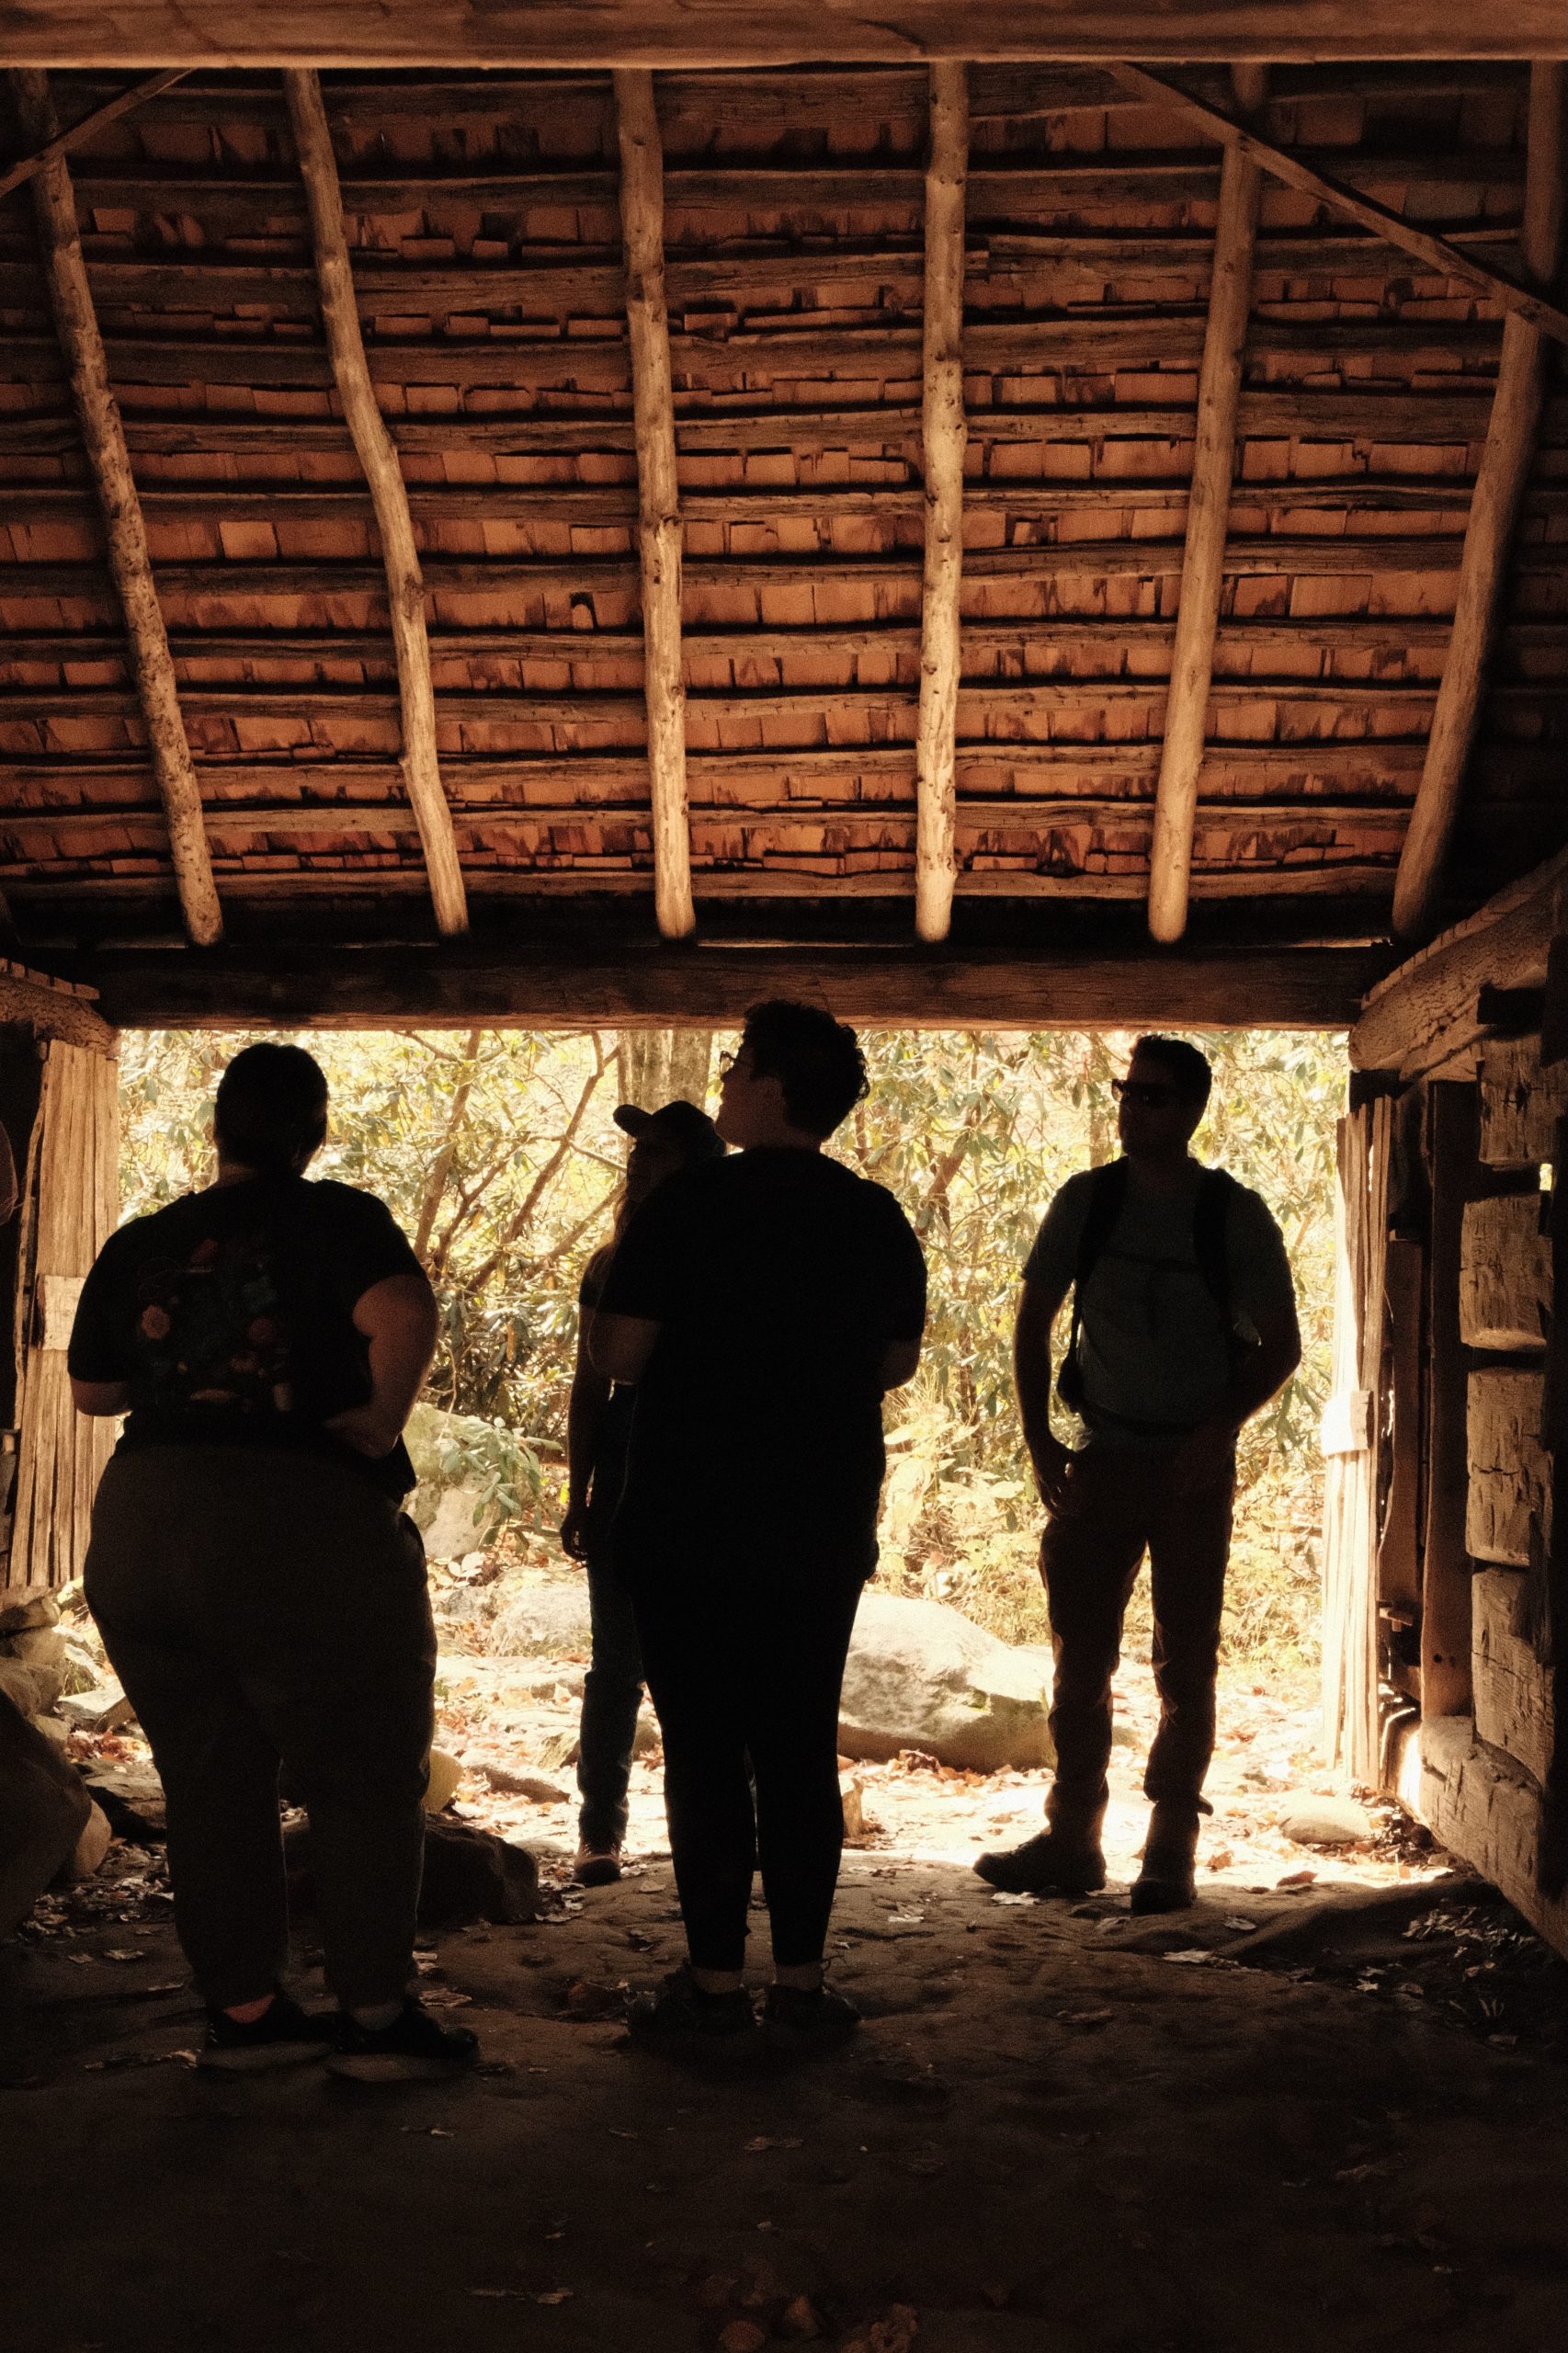 A group of people stand in silhouette inside an old barn.